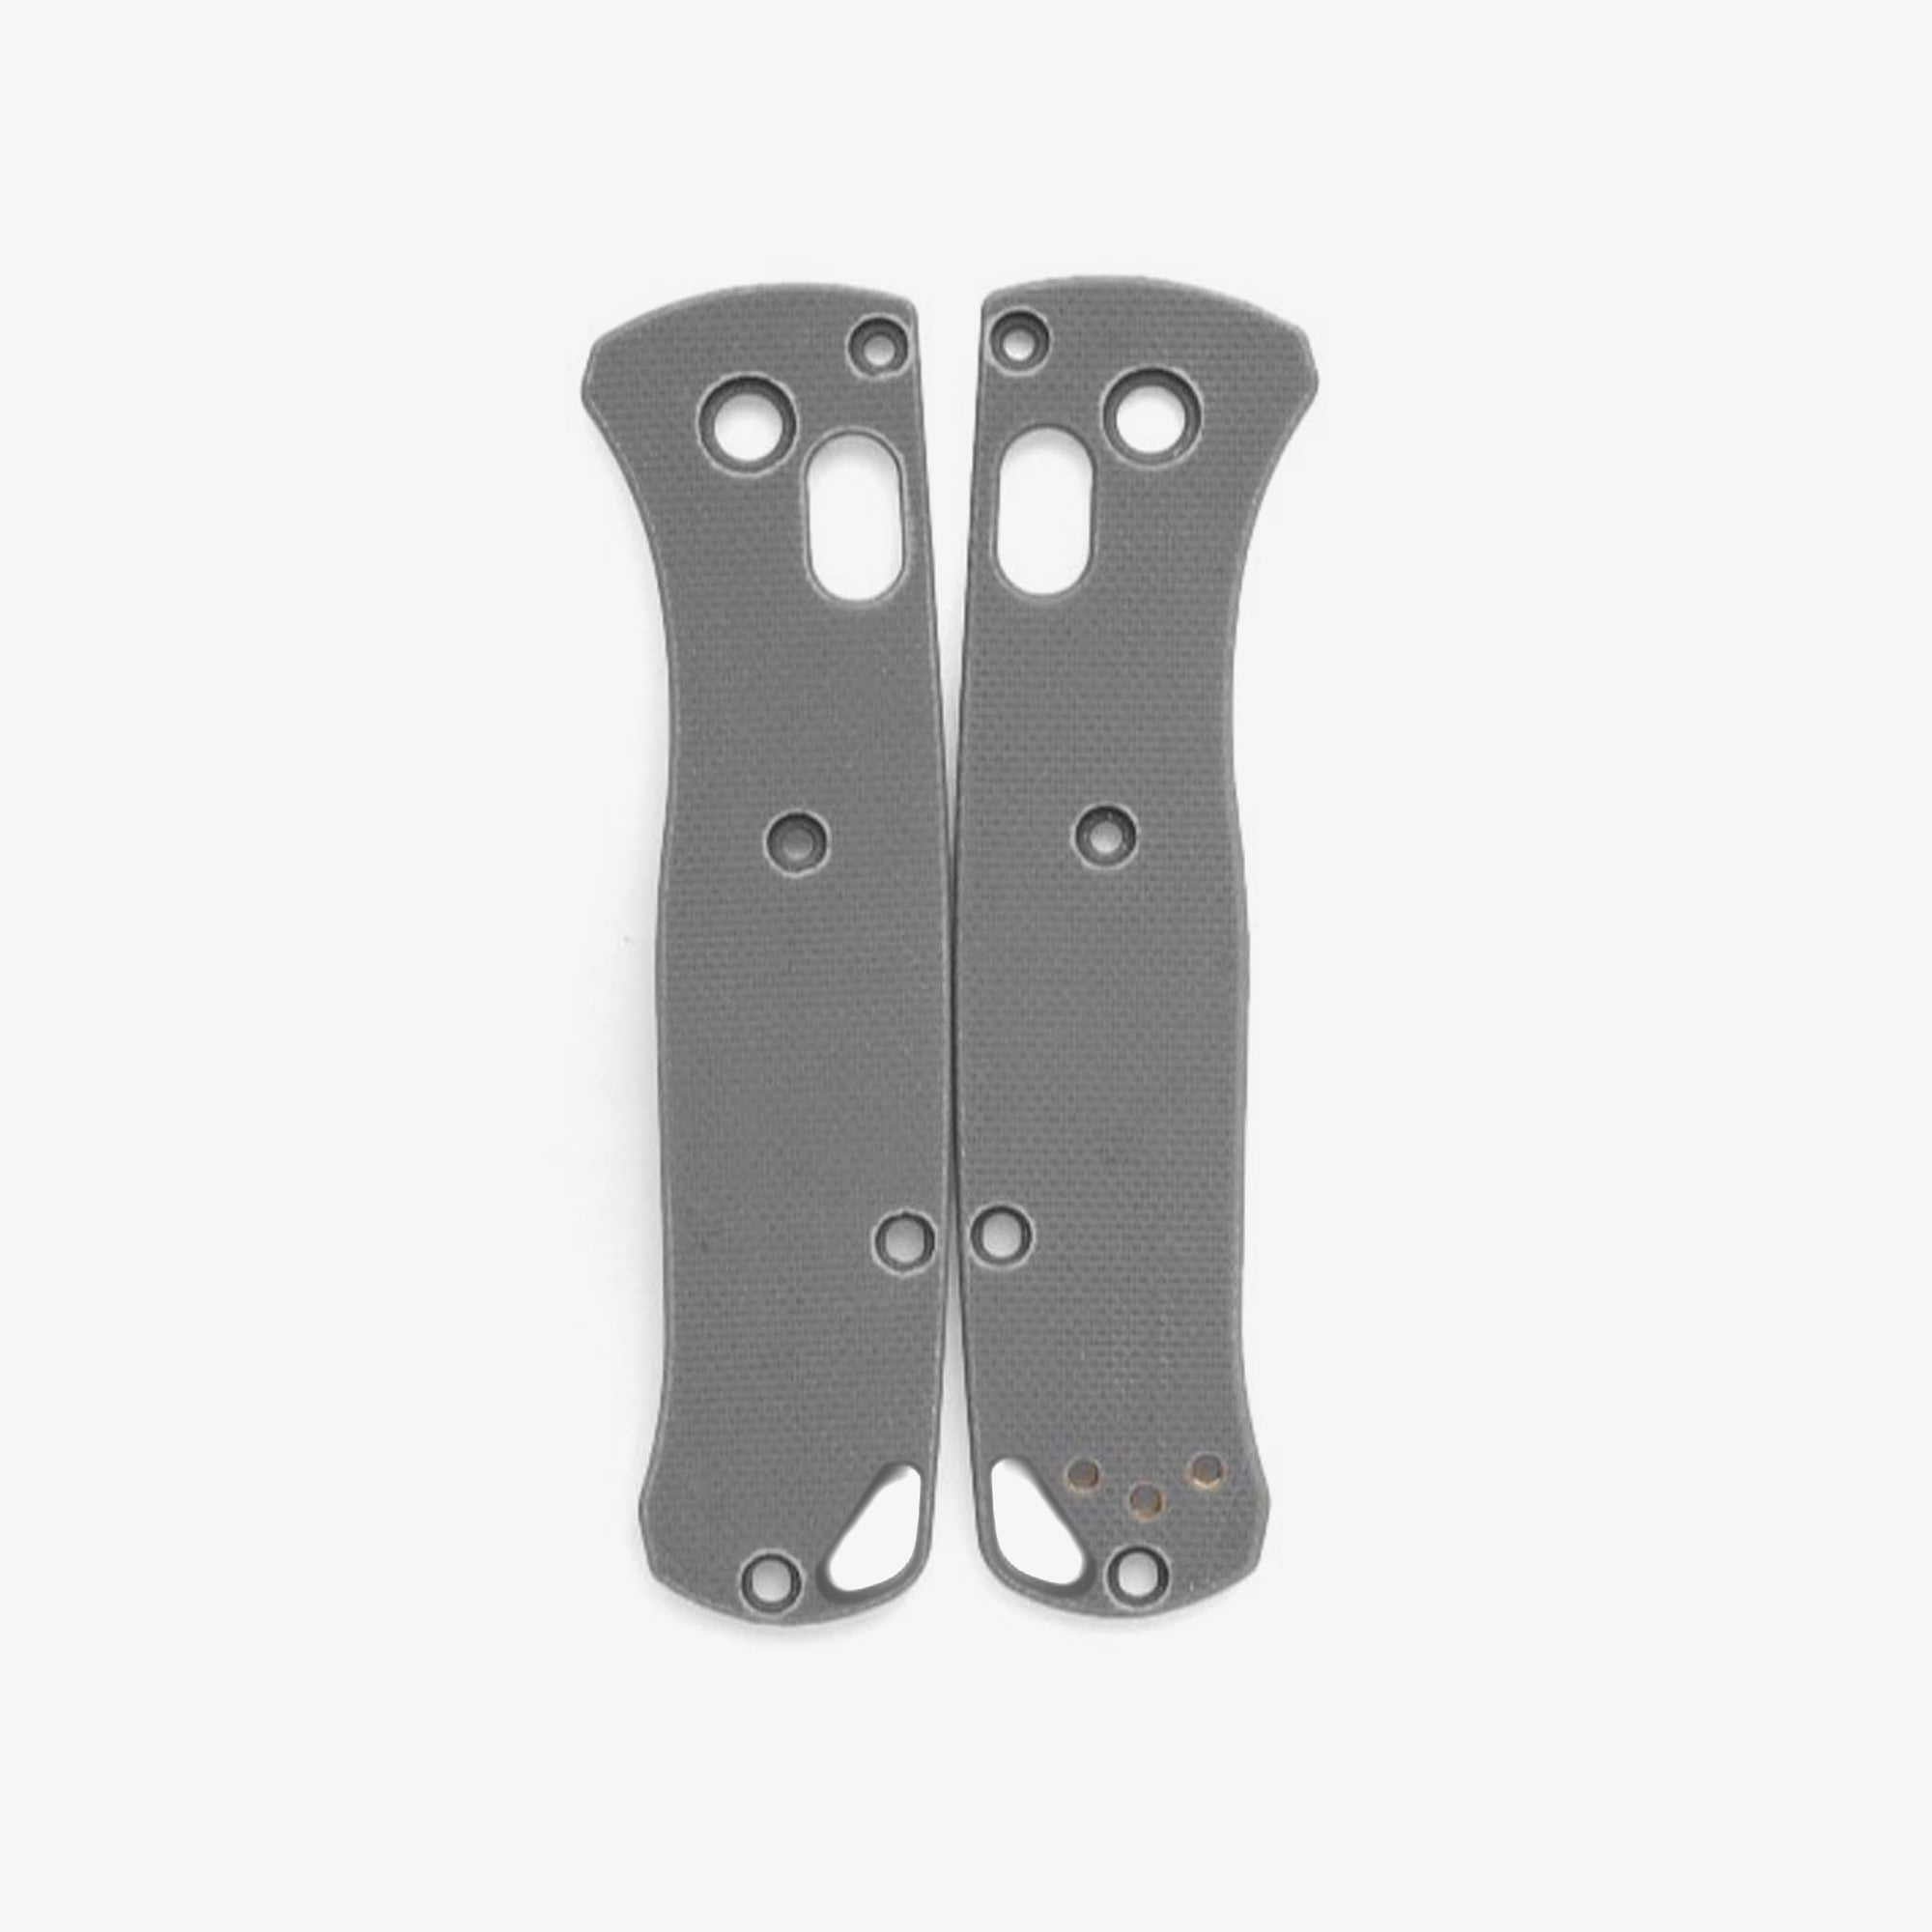 CLOSEOUT G-10 Classic Scales for Benchmade Mini Bugout Knife